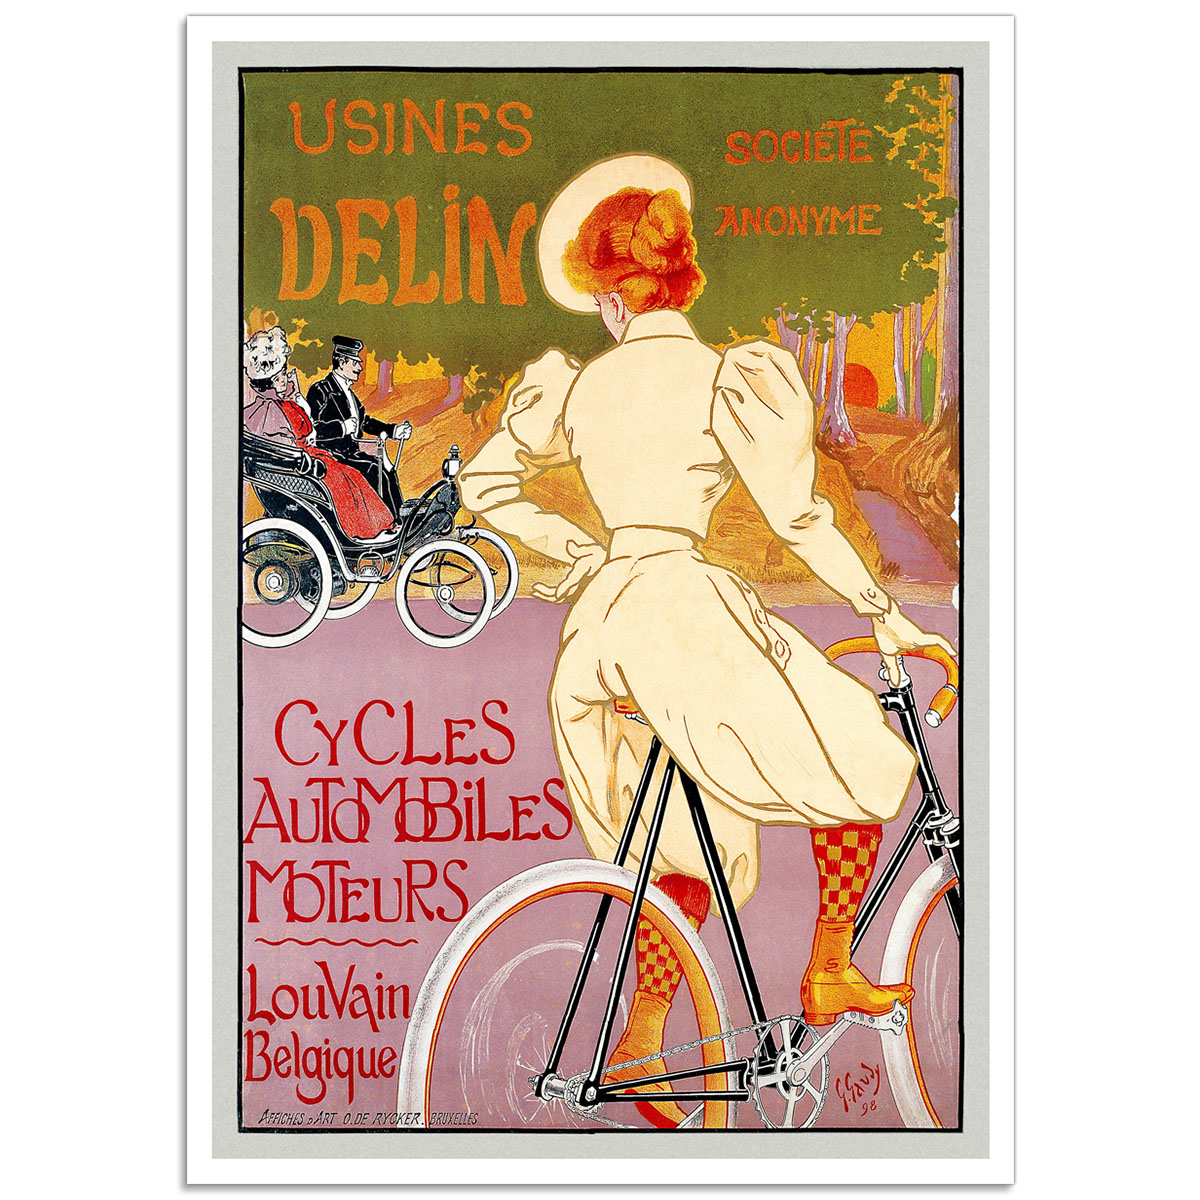 Vintage French Bicycle Poster - Usines Delin Bicycles